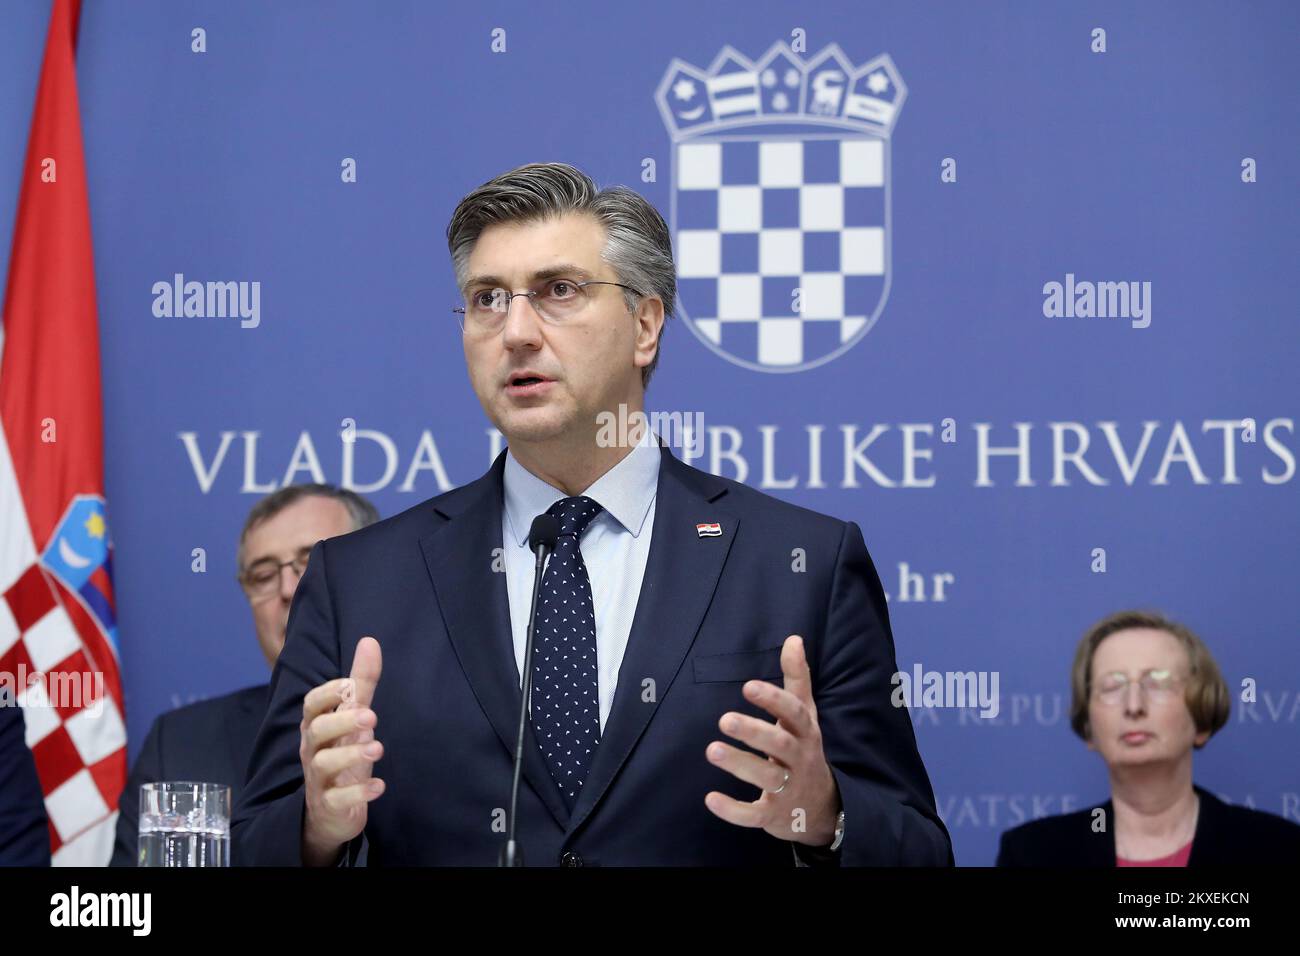 25.02.2020.,Croatia, Zagreb - Prime Minister Andrej Plenkovic announced on press conference that the first case of coronavirus disease (COVID-19) was reported in Croatia.It's about a younger man. His condition is good and he was in Milan, Italy Photo: Patrik Macek/PIXSELL Stock Photo